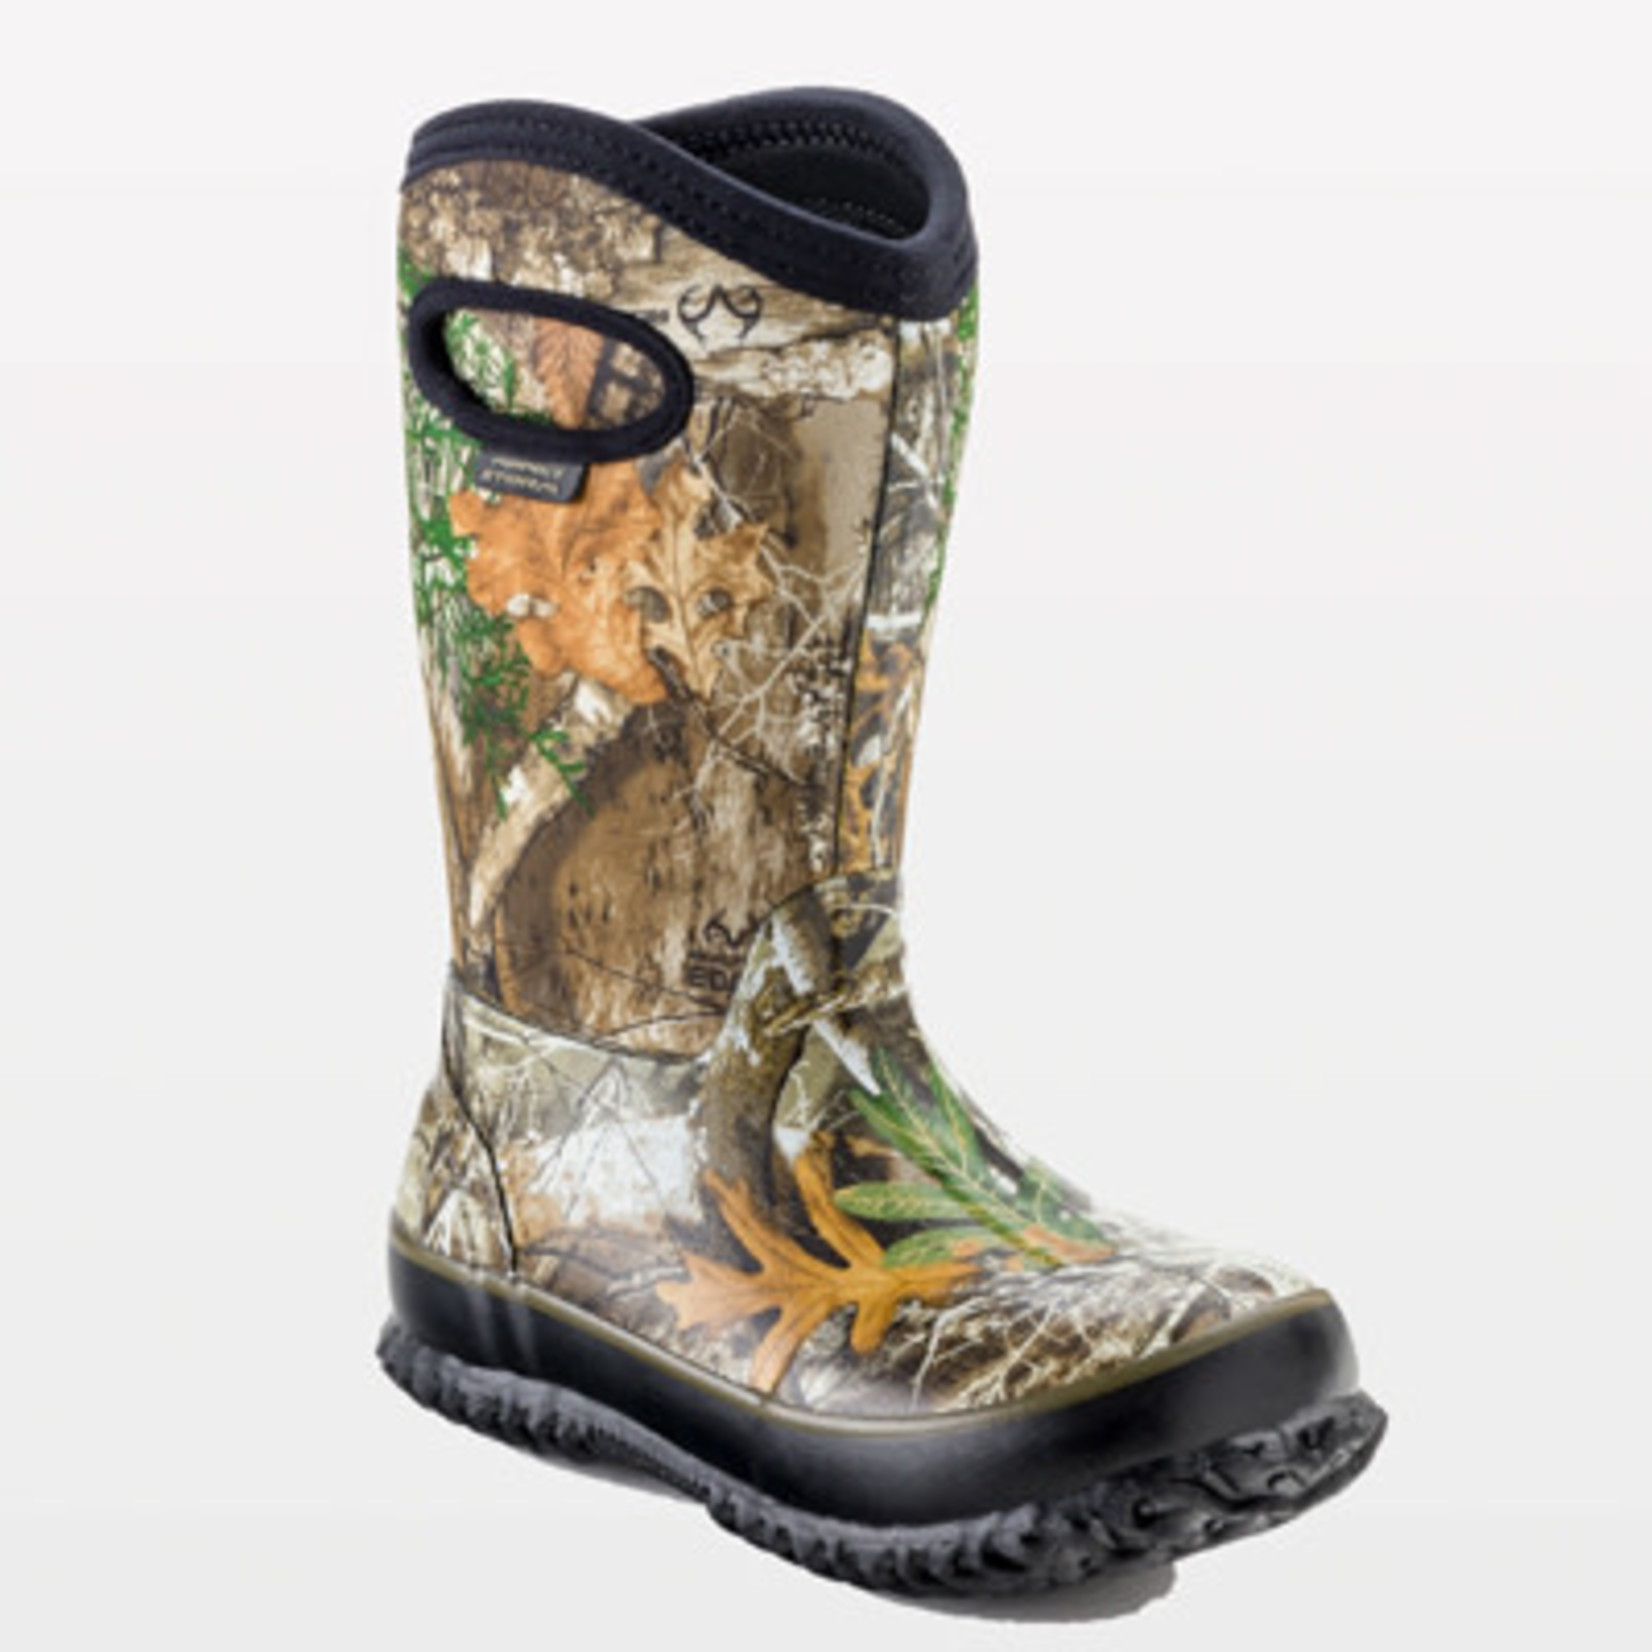 Perfect Storm Camo Realtree Size 5 KIDS BOOT STORM